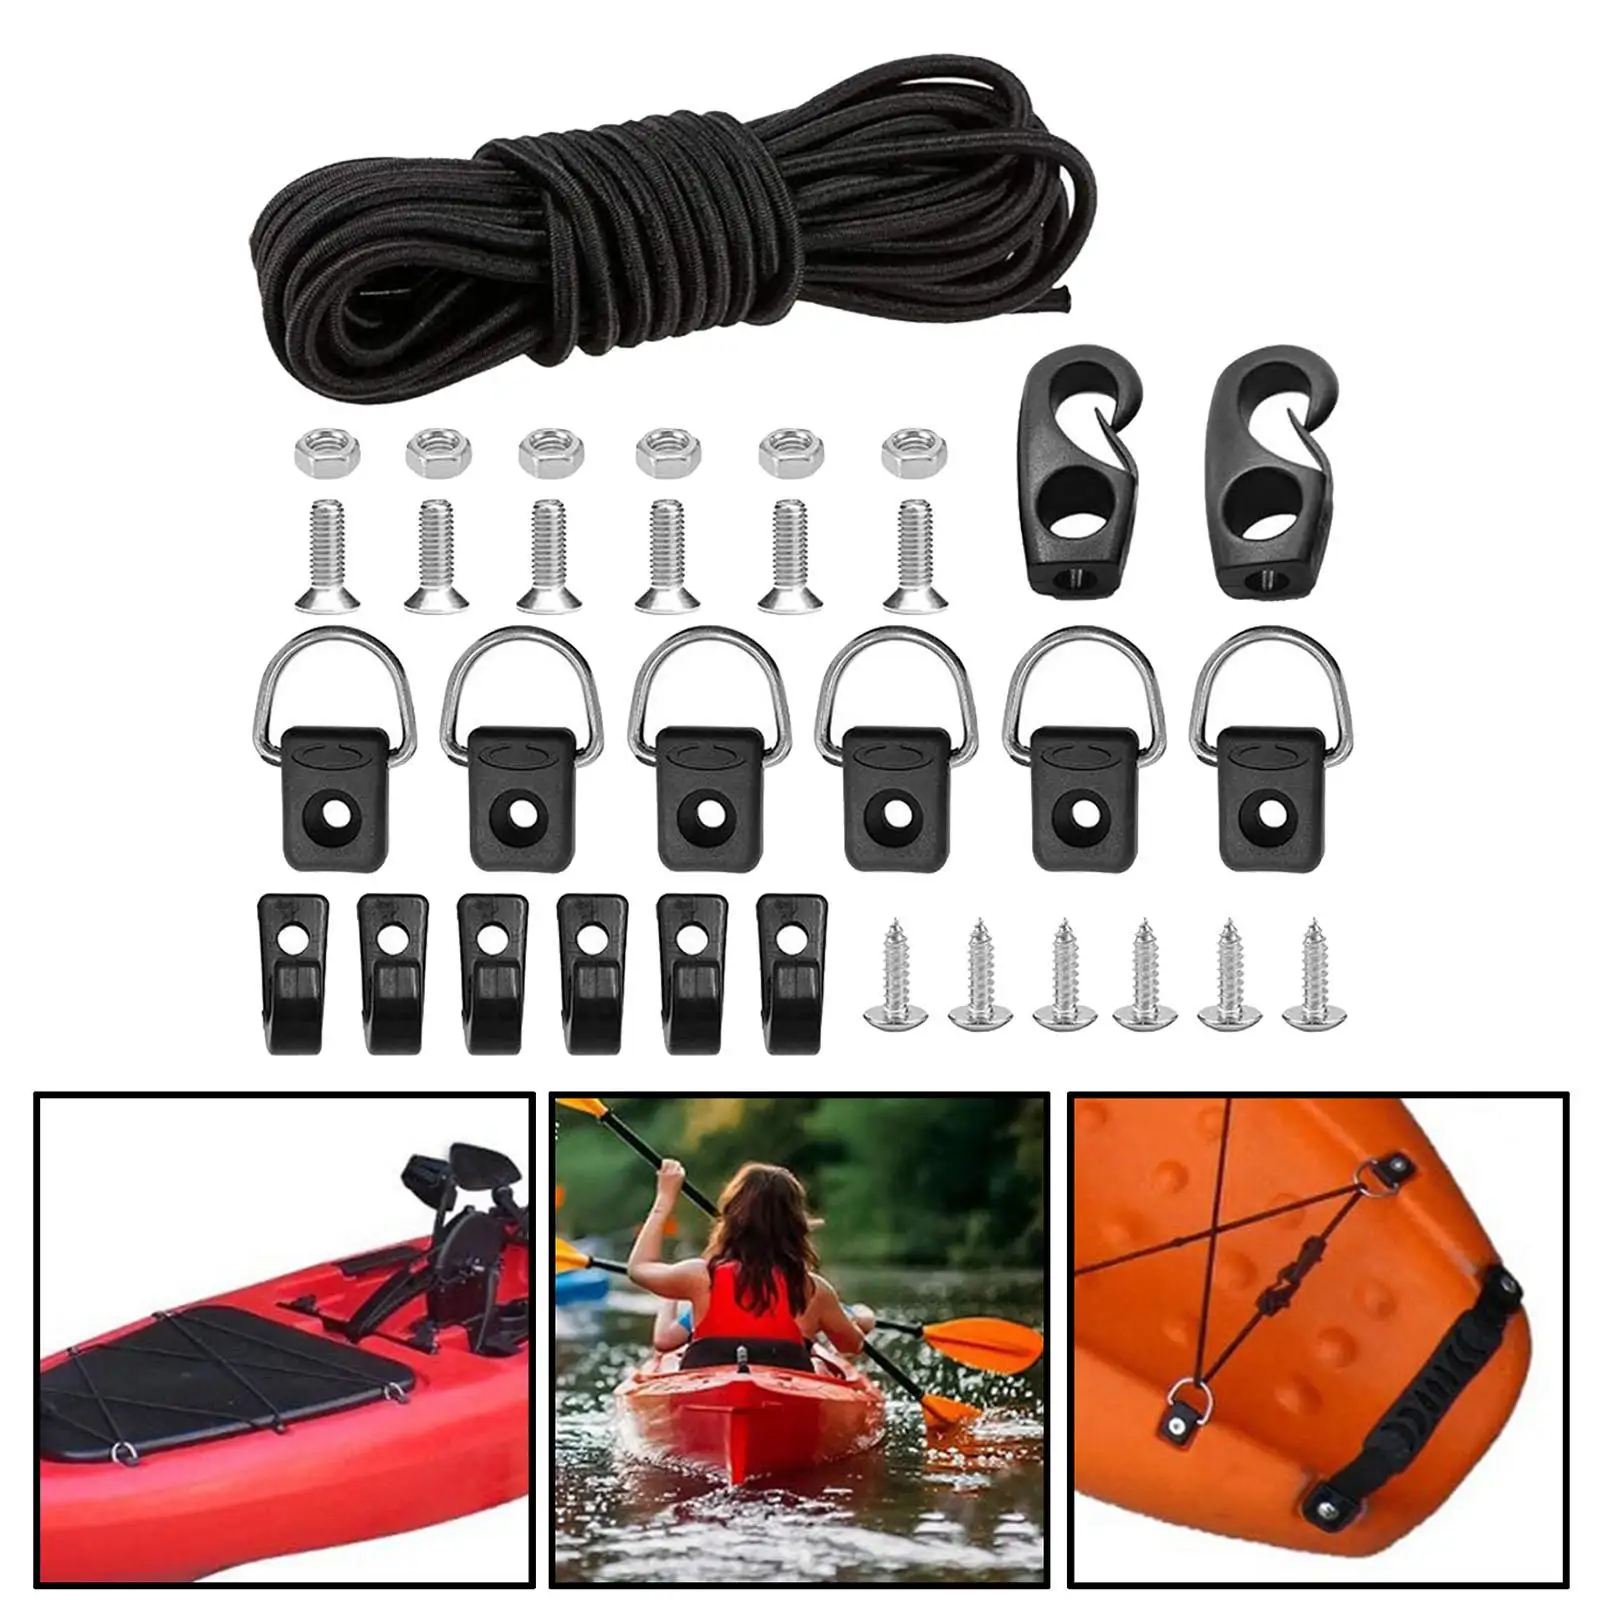 Kayak Deck Rigging Kit 8.2 Feet Bungee Cord with Ends J Hooks for Outfitting